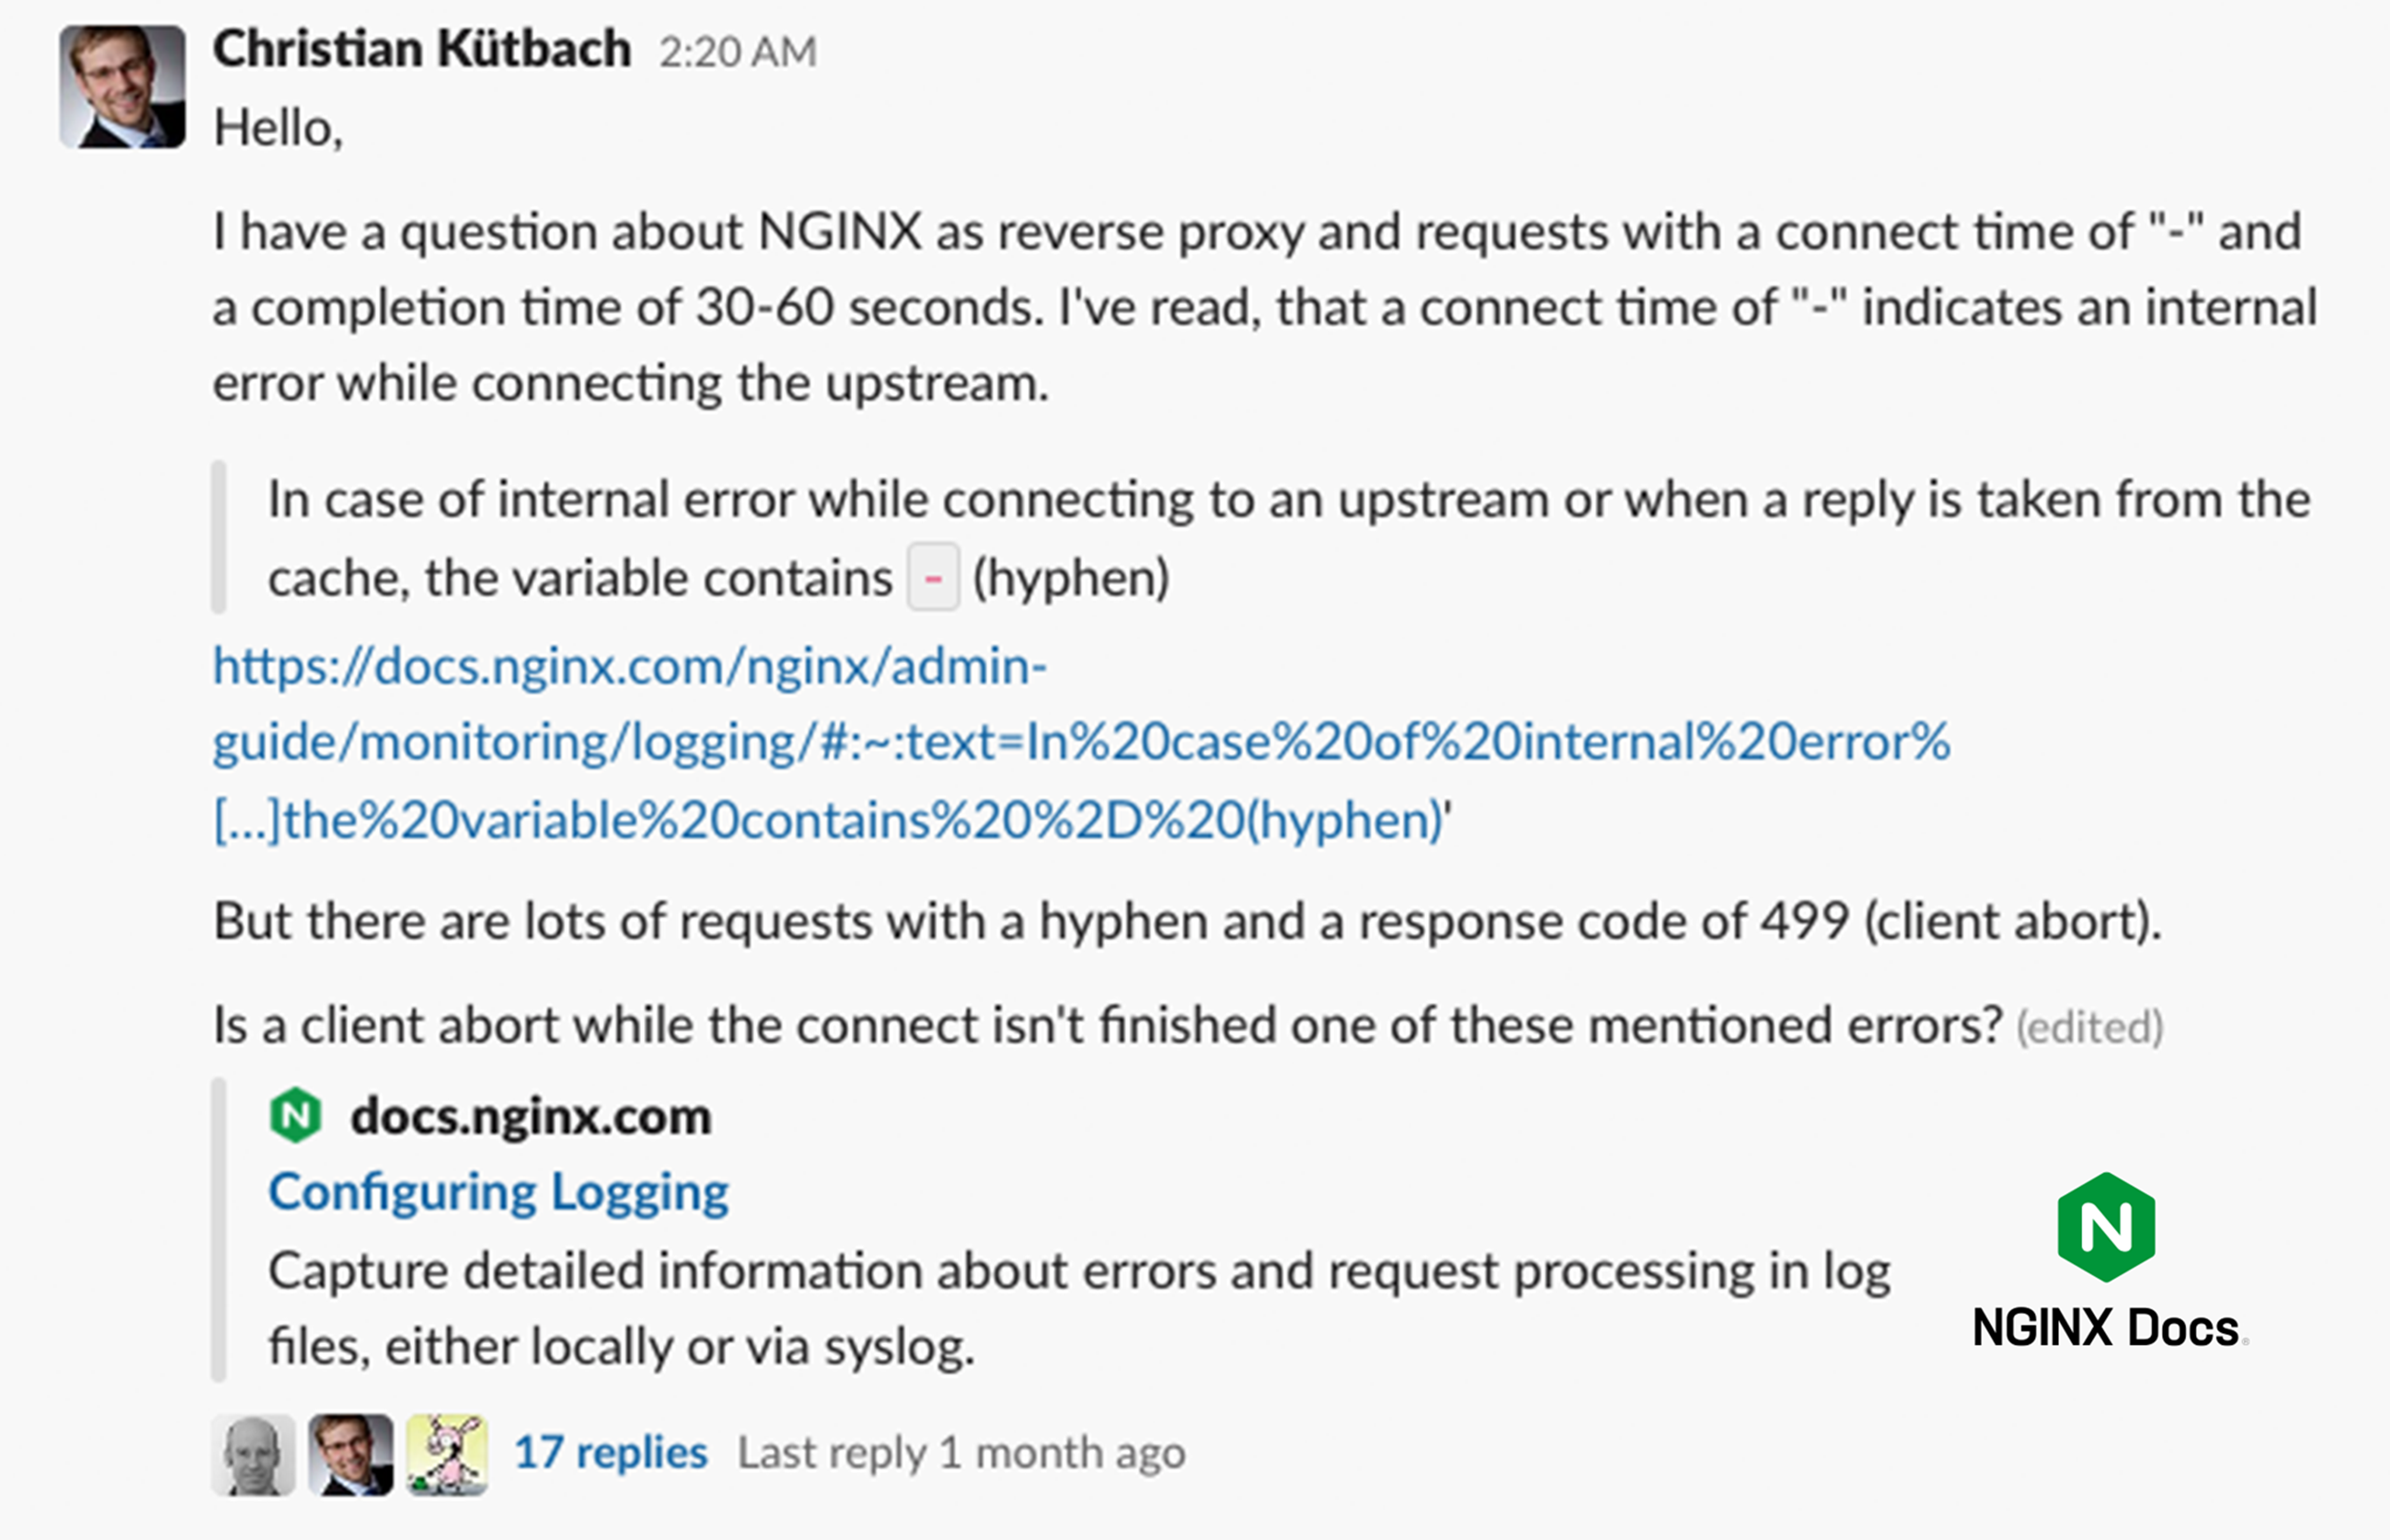 Thread on NGINX Community Slack about requests with a connect time of '-'